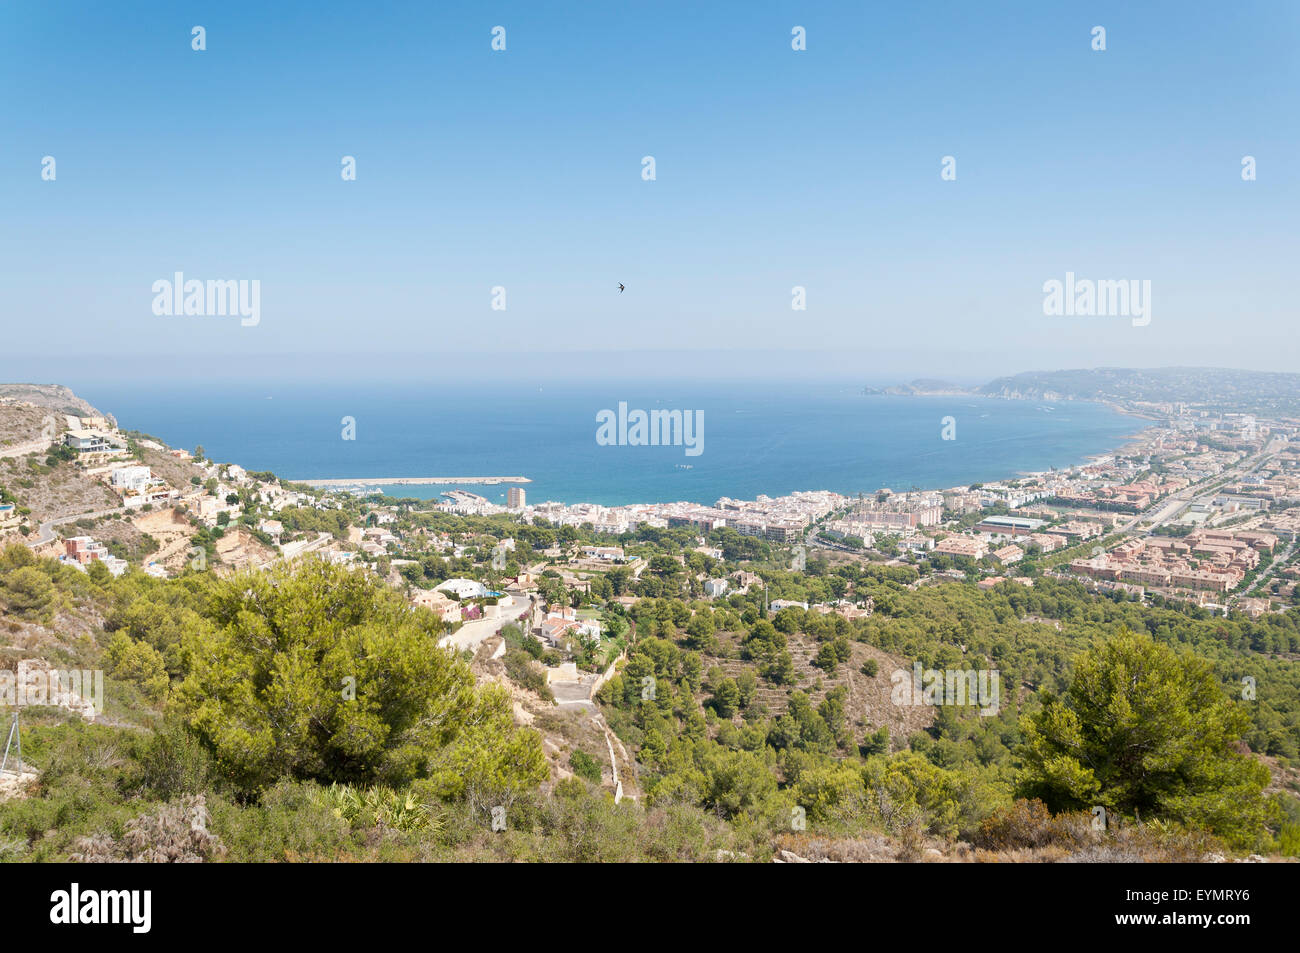 Views of Javea town from Montgo Massif. Javea is a coastal town located in the comarca of Marina Alta Stock Photo